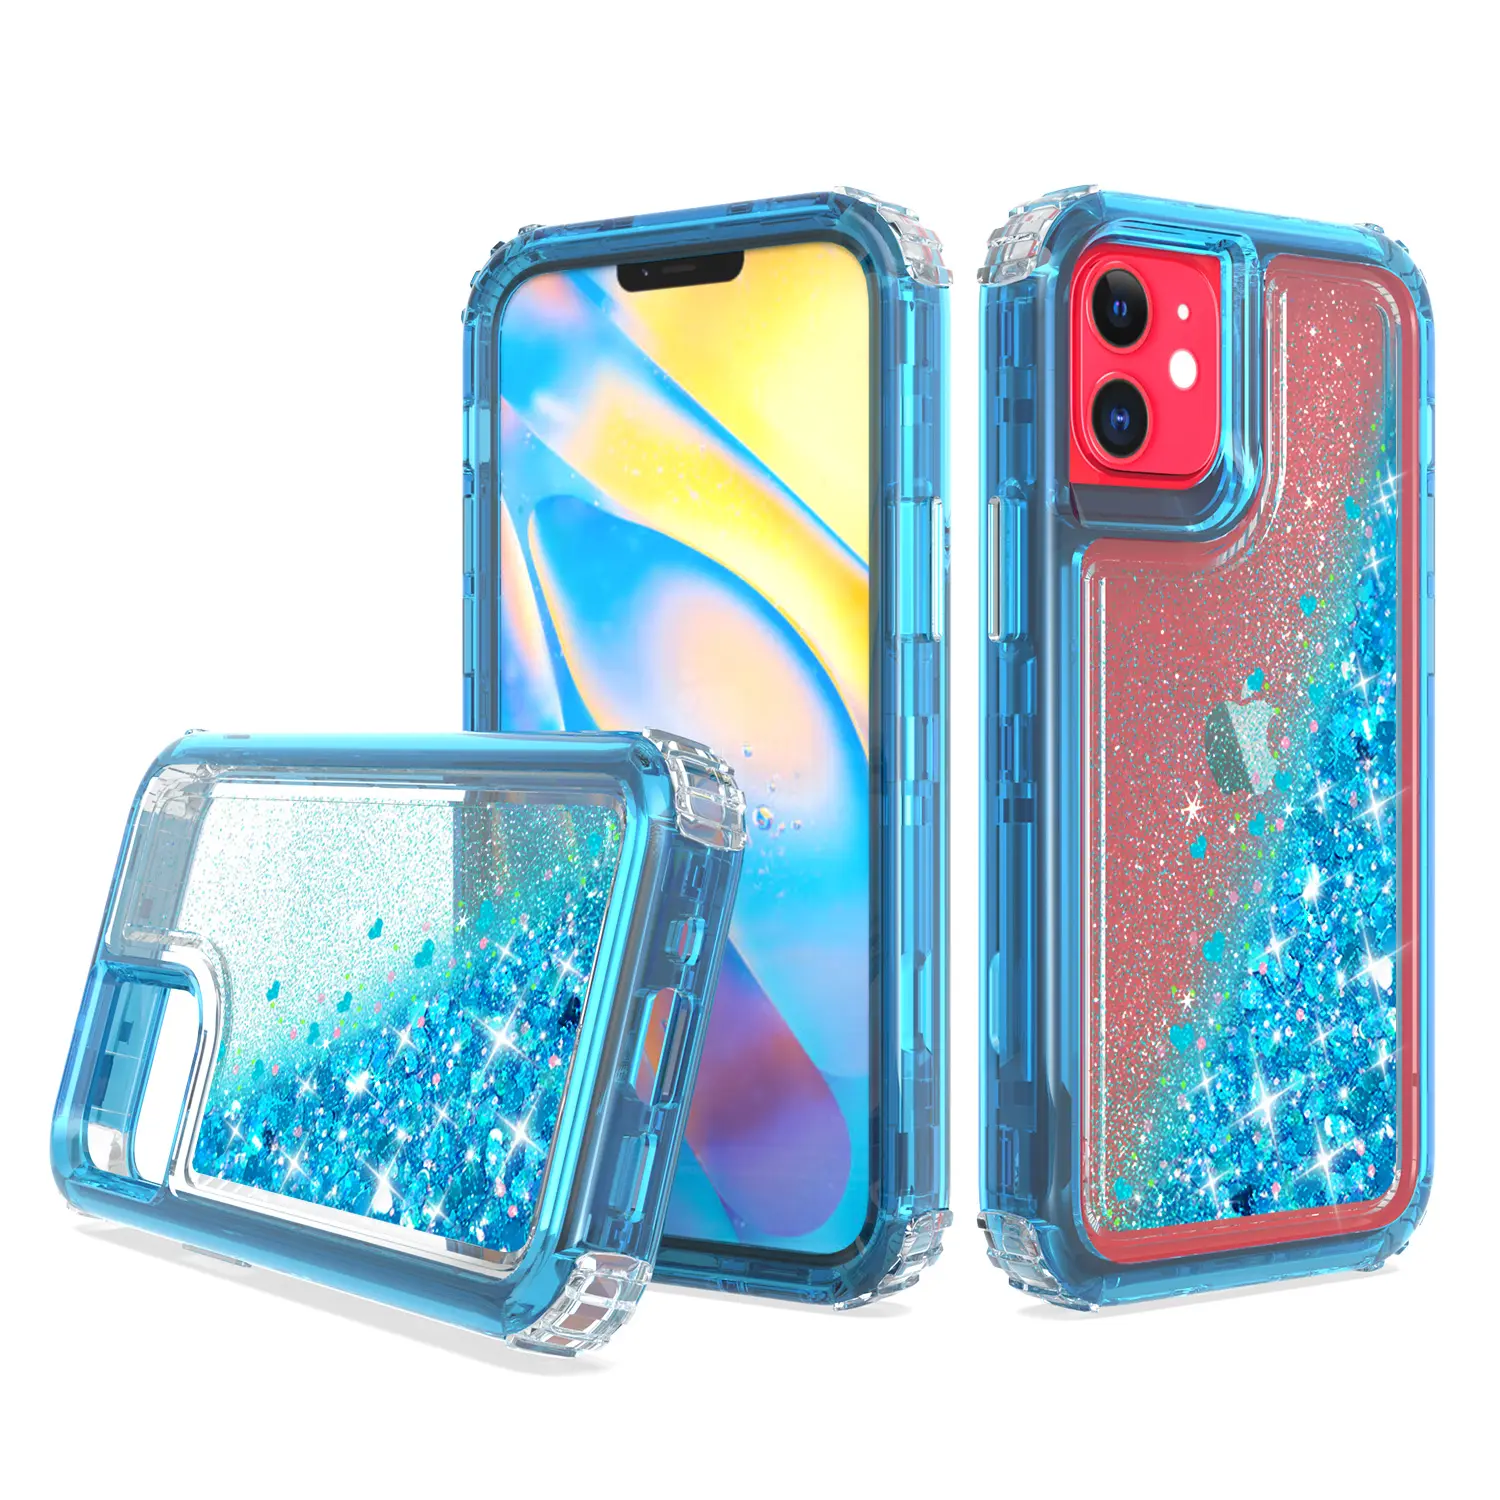 Tpu Pc Hybrid Air Cushion Protective Shockproof Bling Bumper Quicksand Glitter Phone Case For Iphone 11pro Max 6 7 8